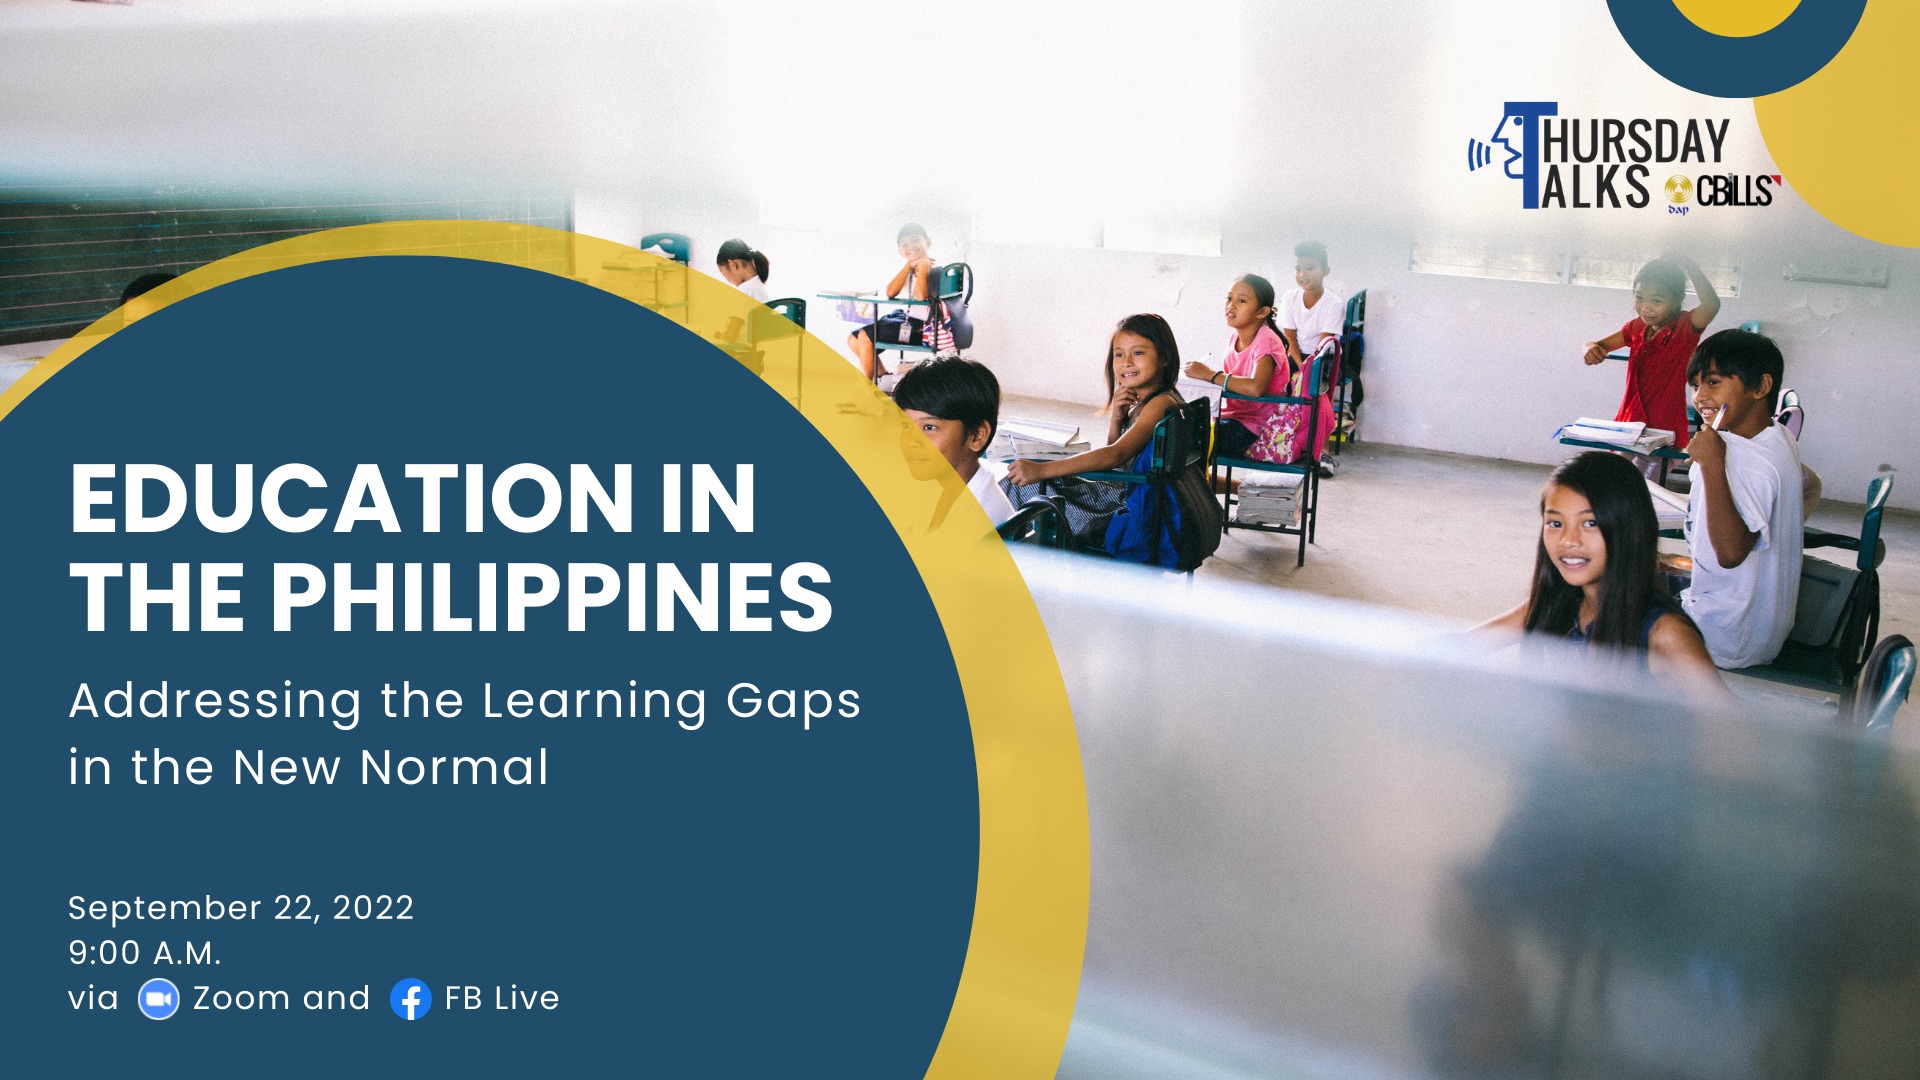 research topic about new normal education in the philippines